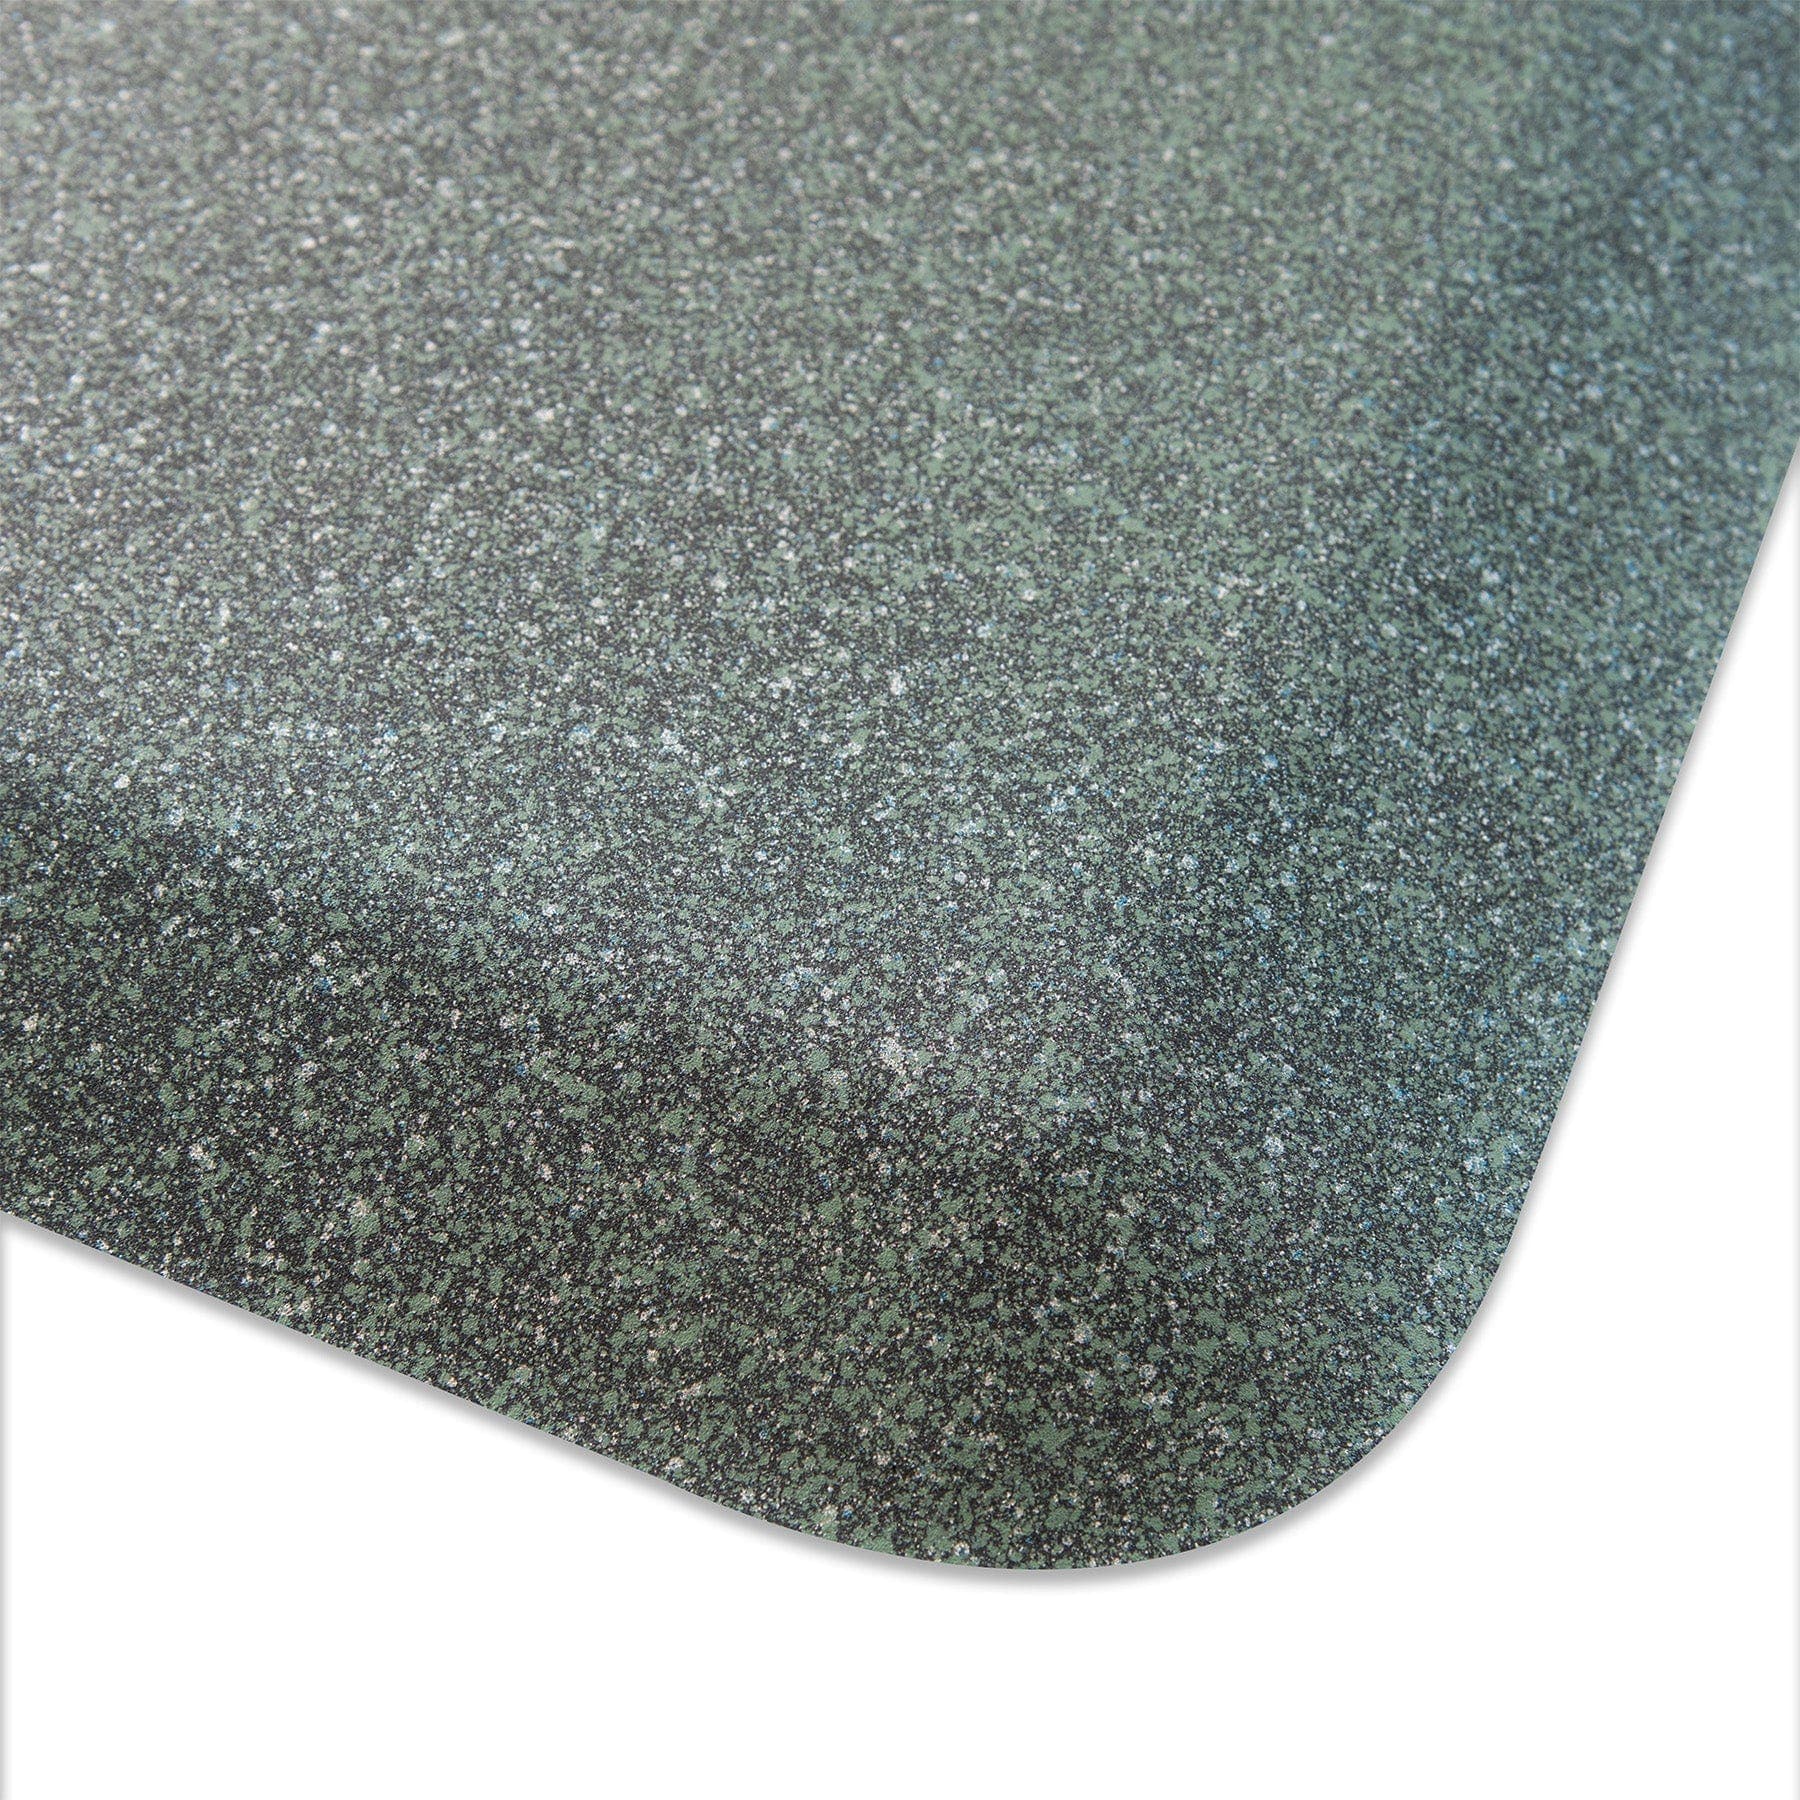 WellnessMats All WellnessMats WellnessMats Granite Collection - Jade